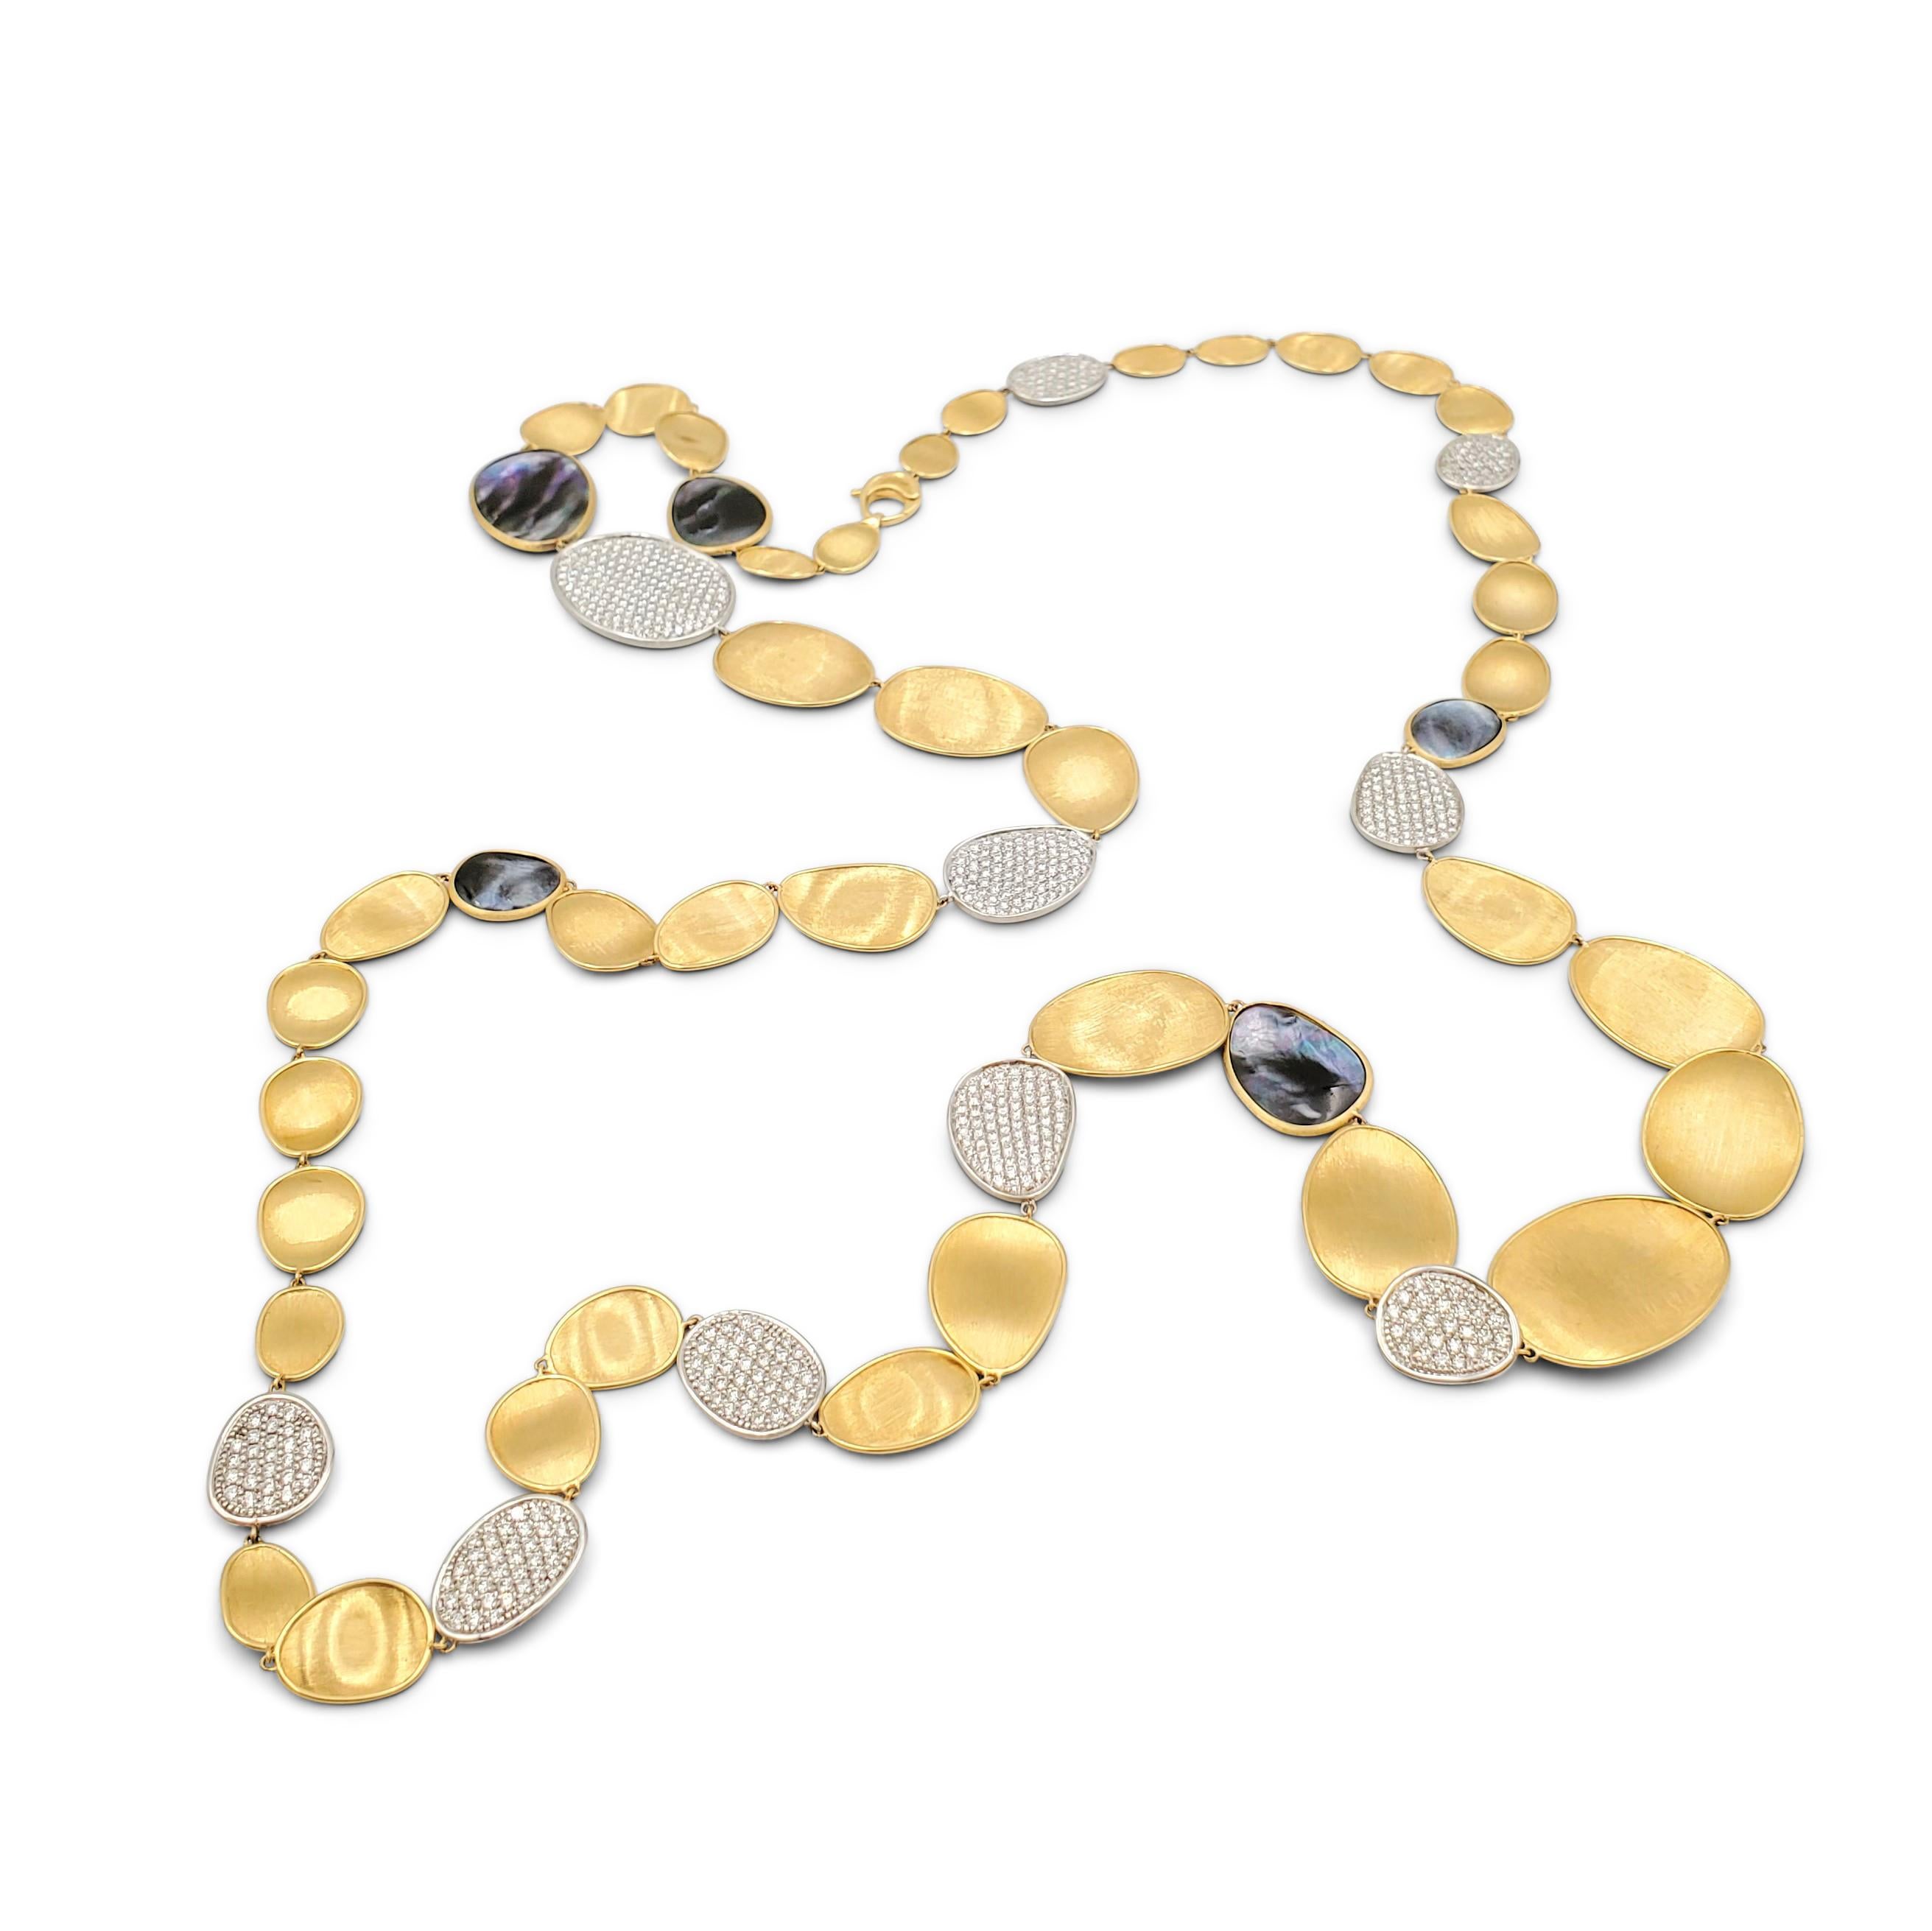 Authentic Marco Bicego 'Lunaria' sautoir necklace features a fluid alternating sequence of hand-engraved 18 karat gold, polished black mother-of-pearl, and pavé diamond plates. Signed Marco Bicego, Made in Italy, 750. The necklace is not presented